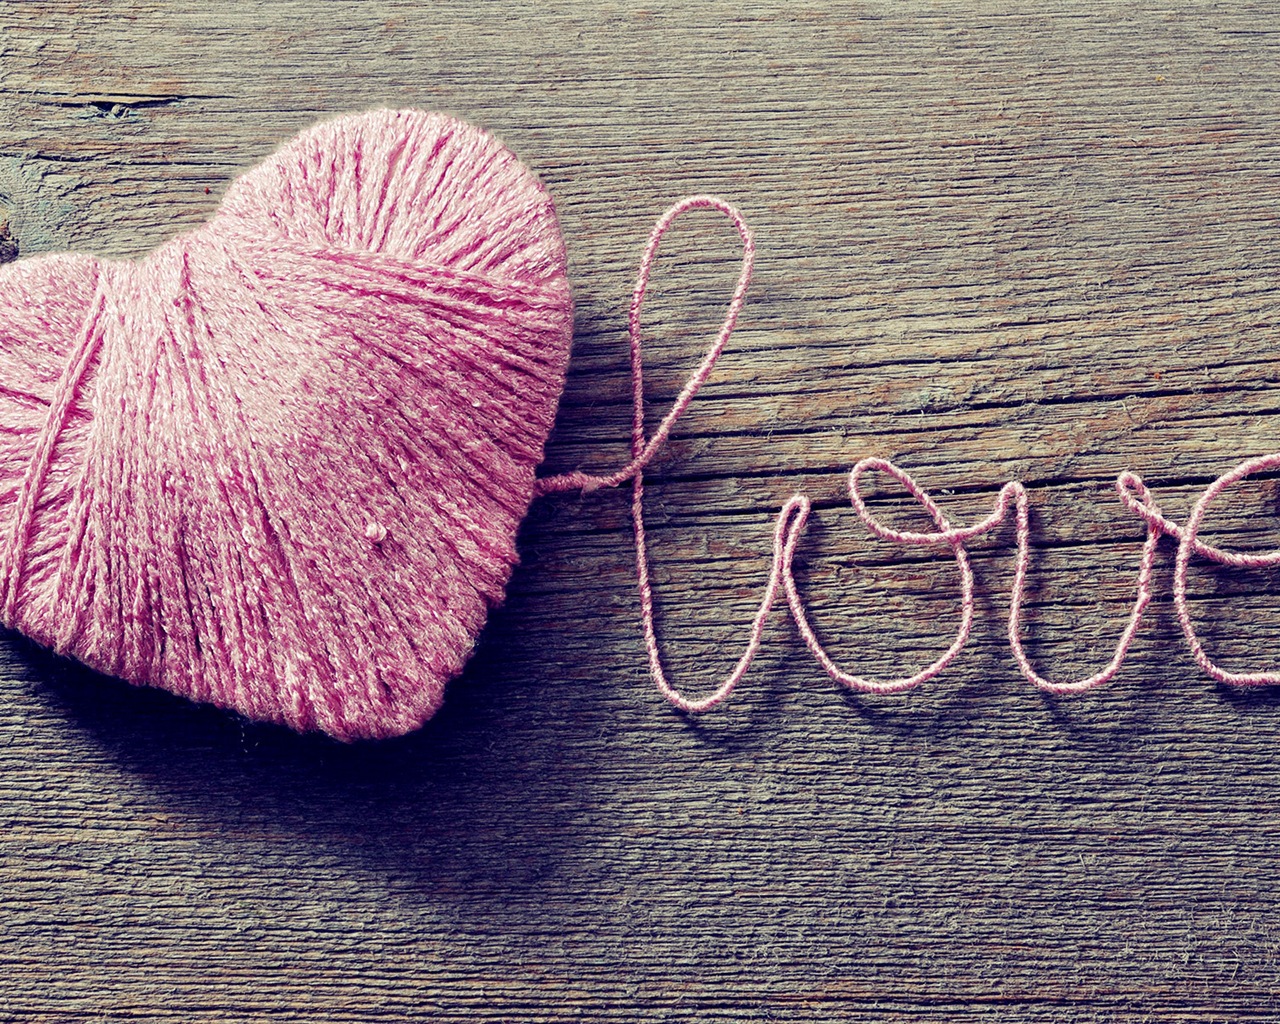 The theme of love, creative heart-shaped HD wallpapers #10 - 1280x1024